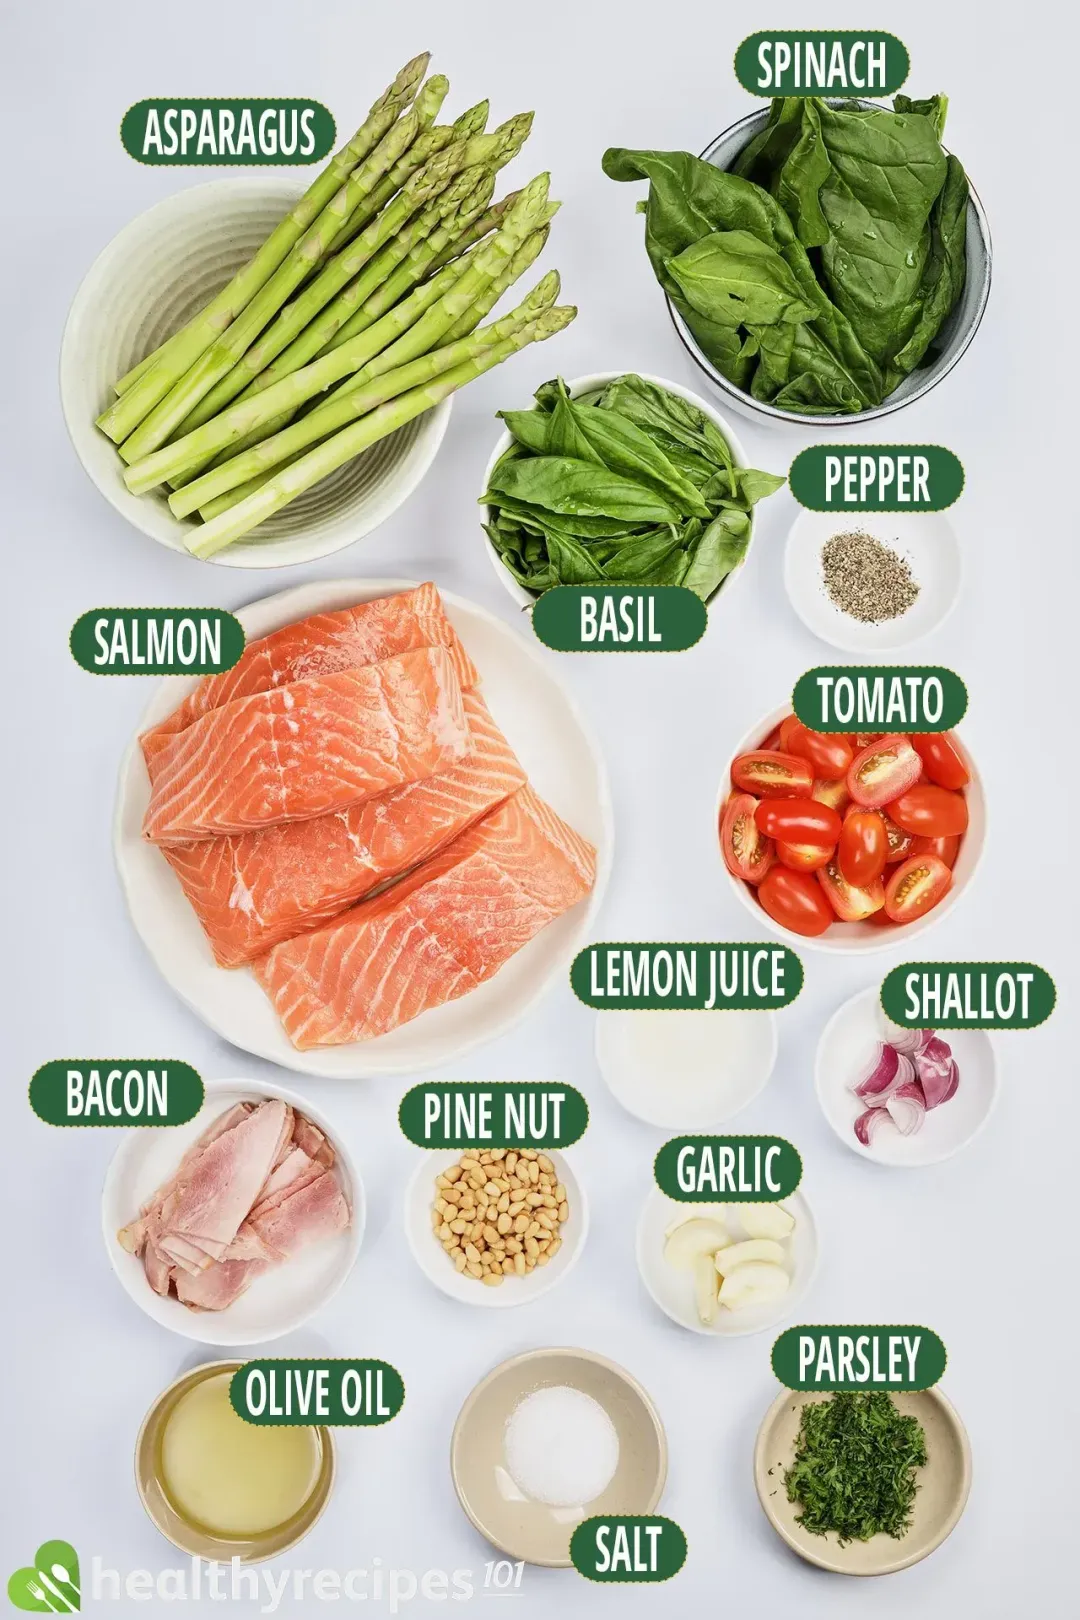 Ingredients for this salmon pesto: boneless salmon fillets, bacon, asparagus, spinach, basil, halved cherry tomatoes, shallot, garlic, pine nut, lemon juice, and other spices and herbs